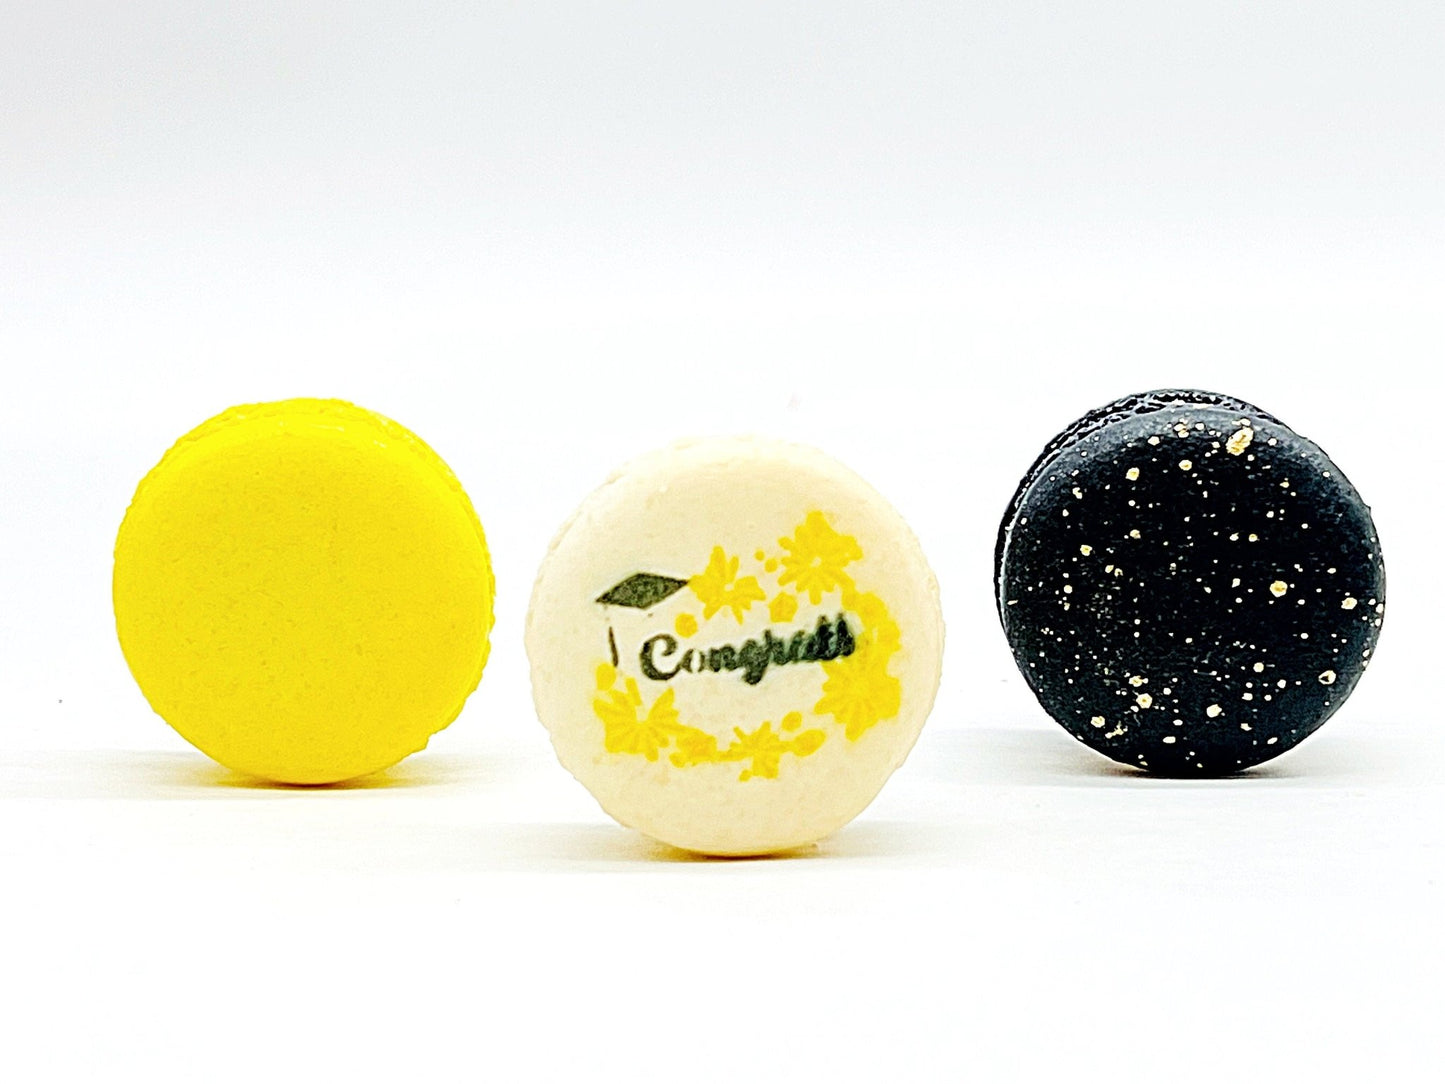 Congrats French Macaron Box (Black / Yellow) | Available in 6 & 12 Pack - Macaron CentraleBlackberry6 Pack